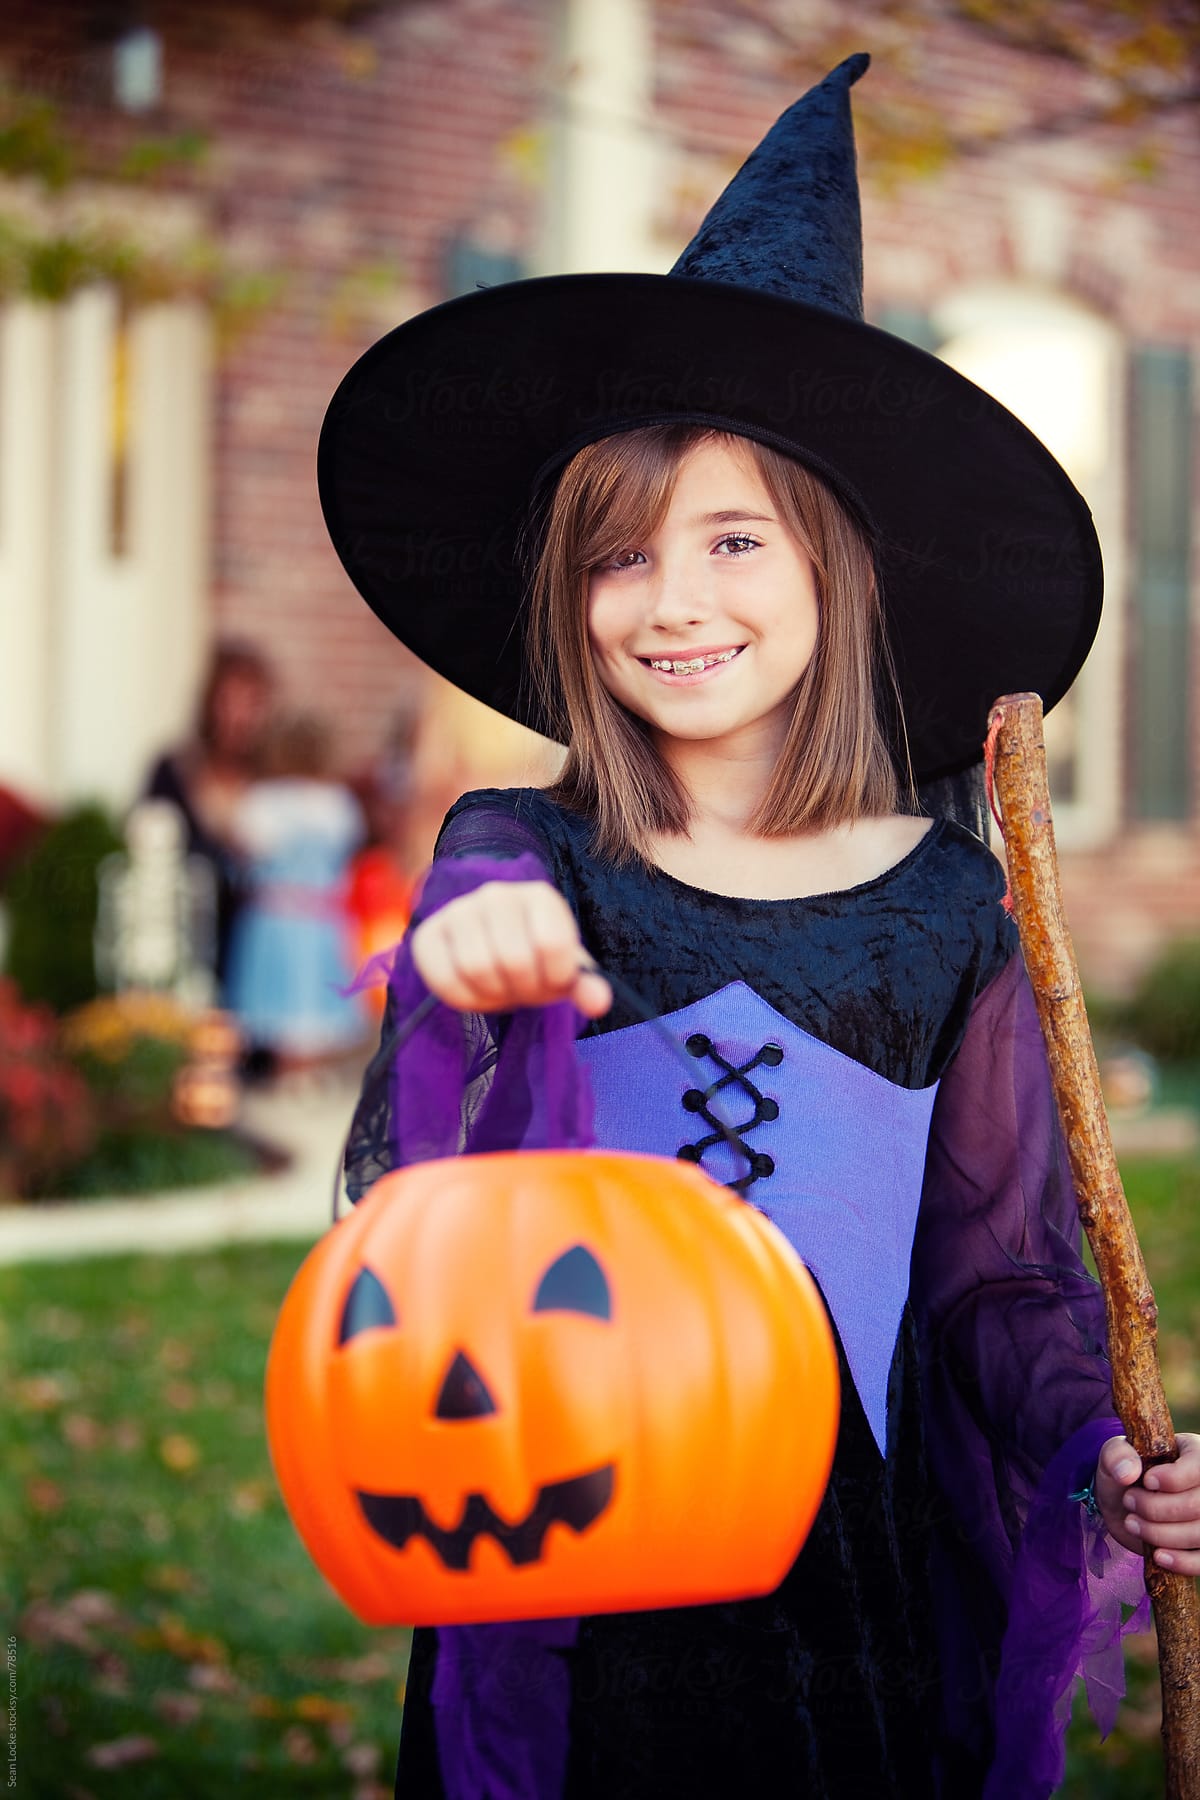 Halloween: Witch Ready for More Candy on Halloween